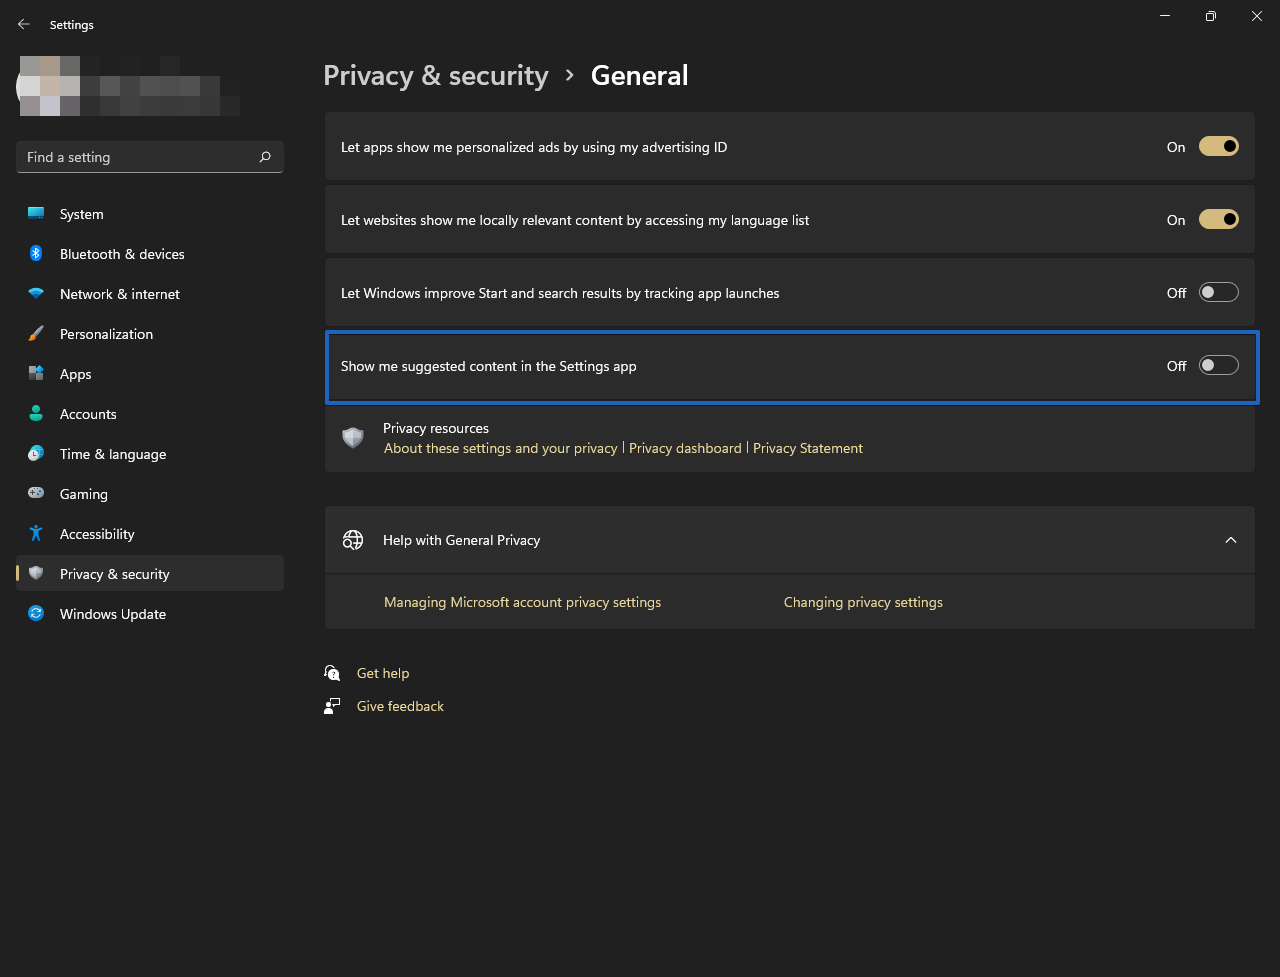 Disable the suggested content from general settings